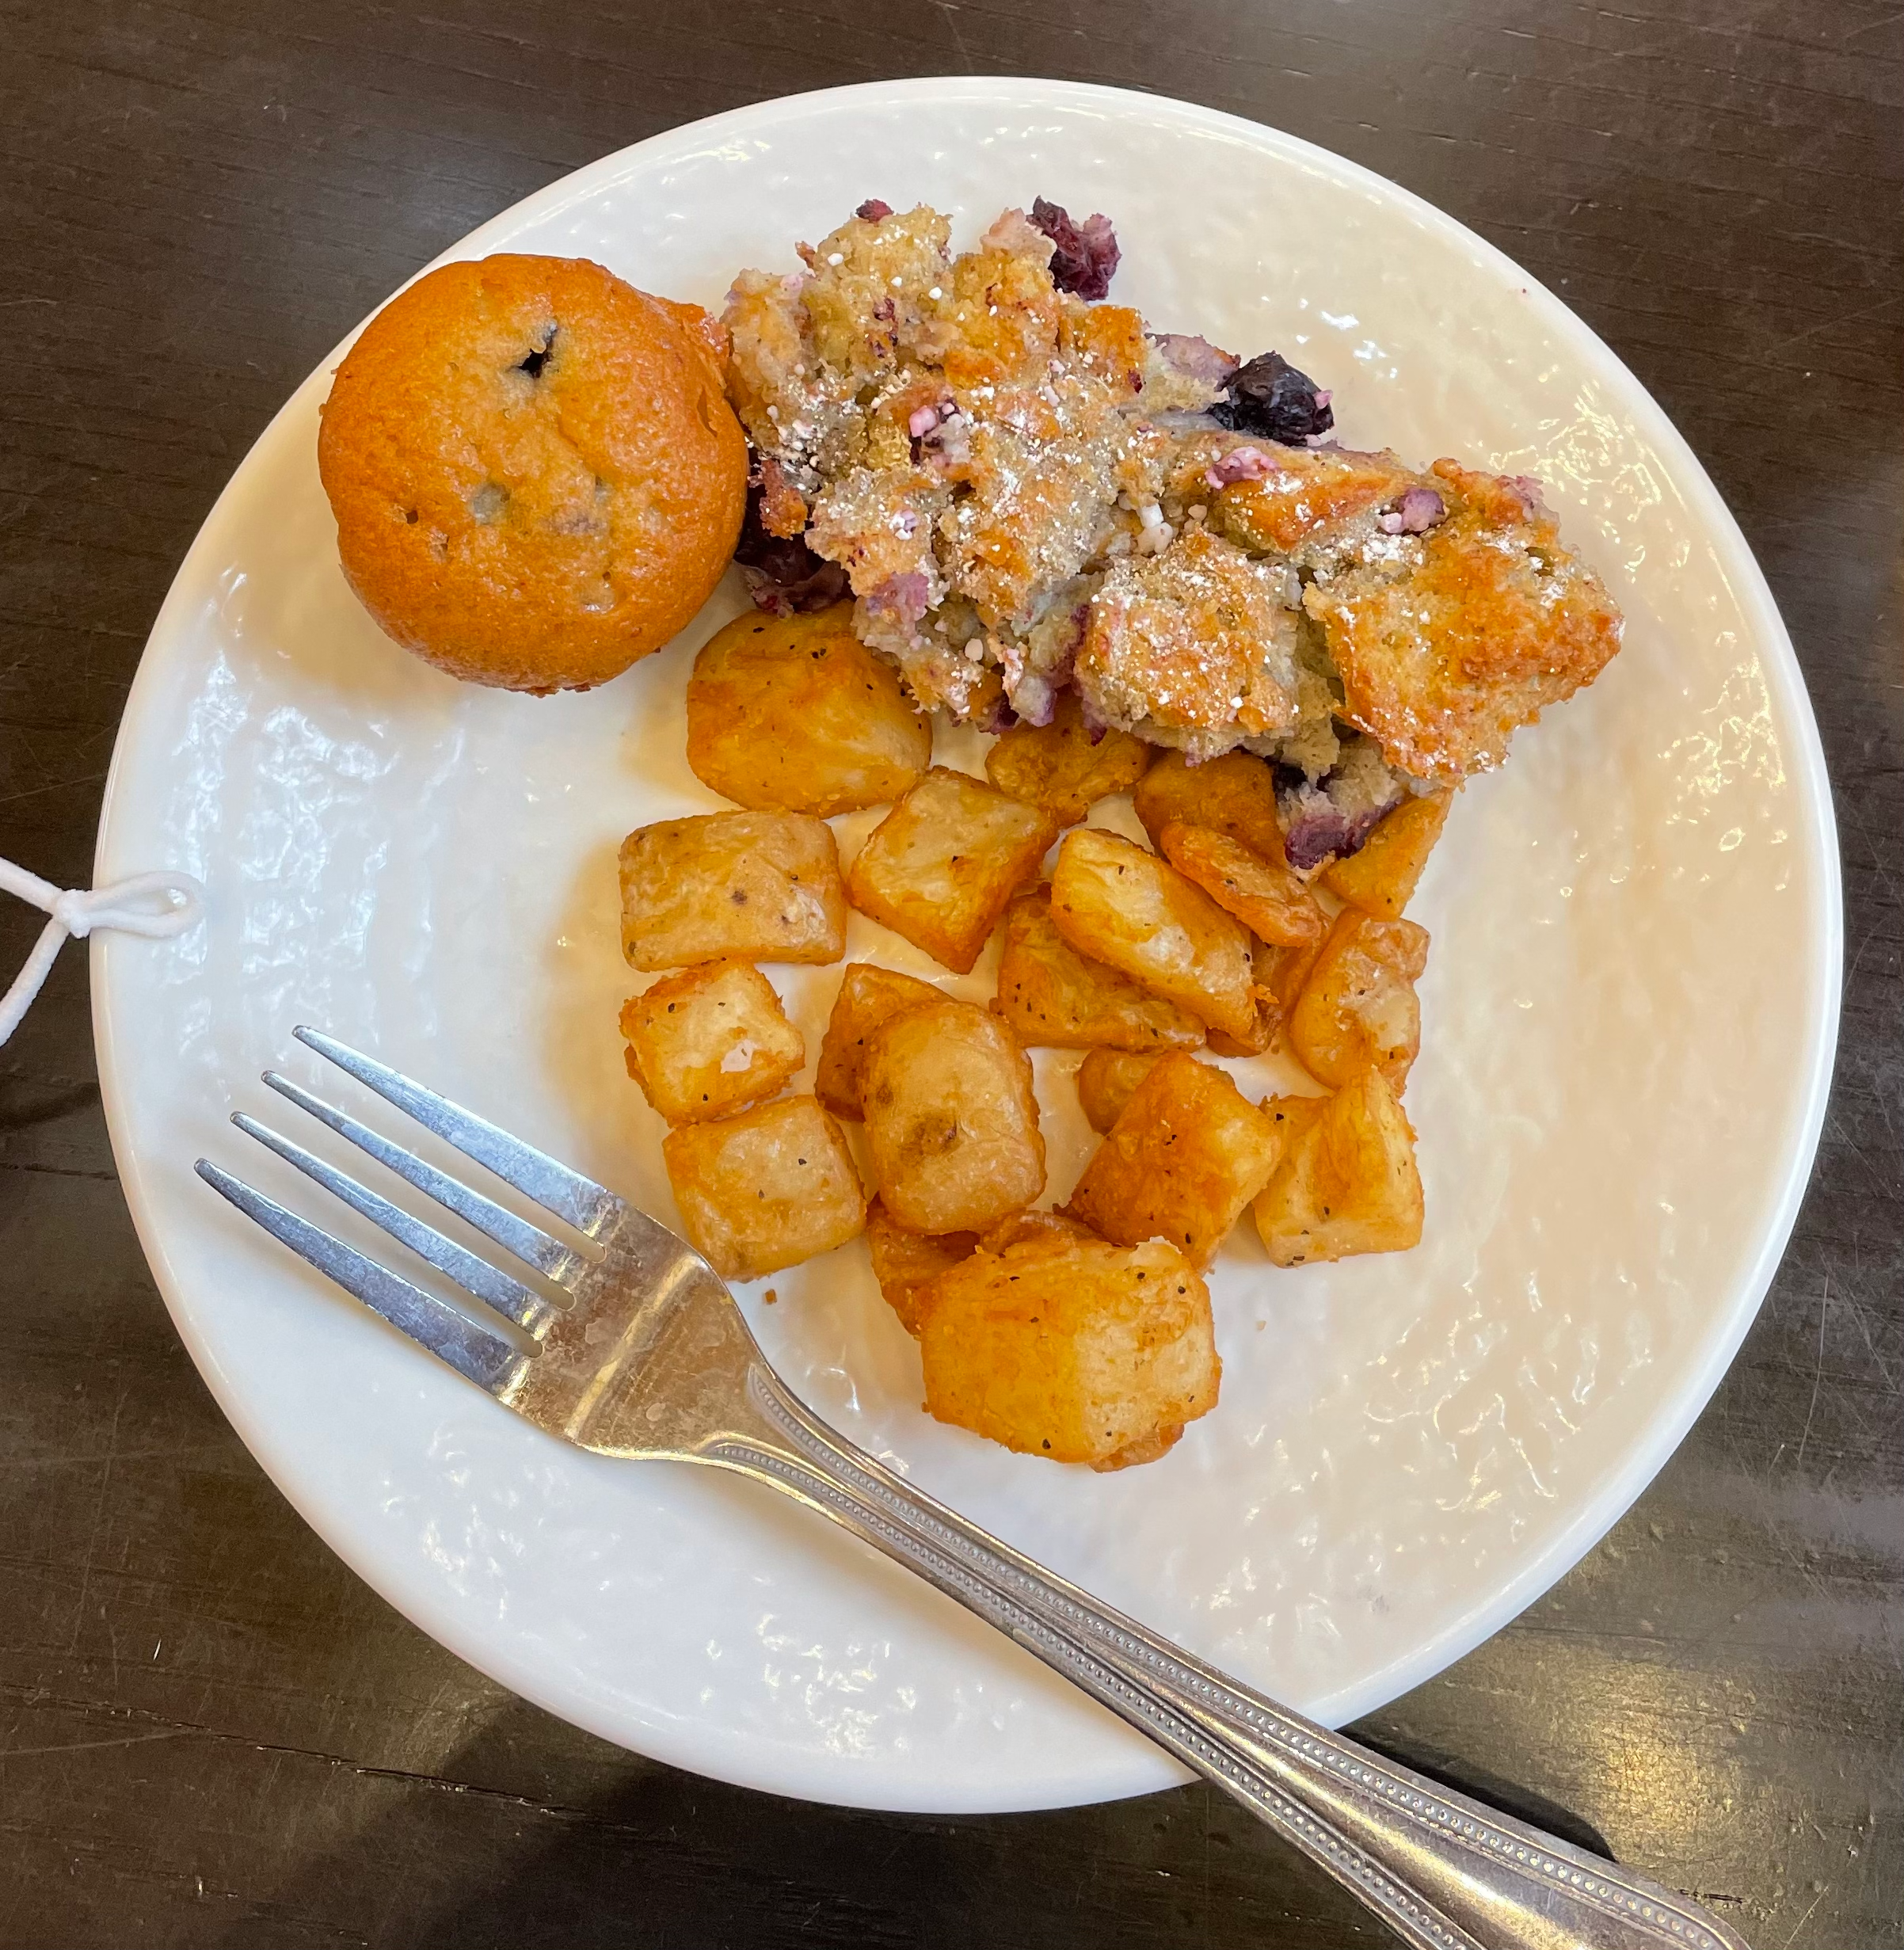 Blueberry muffin, blueberry muffin bake, and fried potato cubes